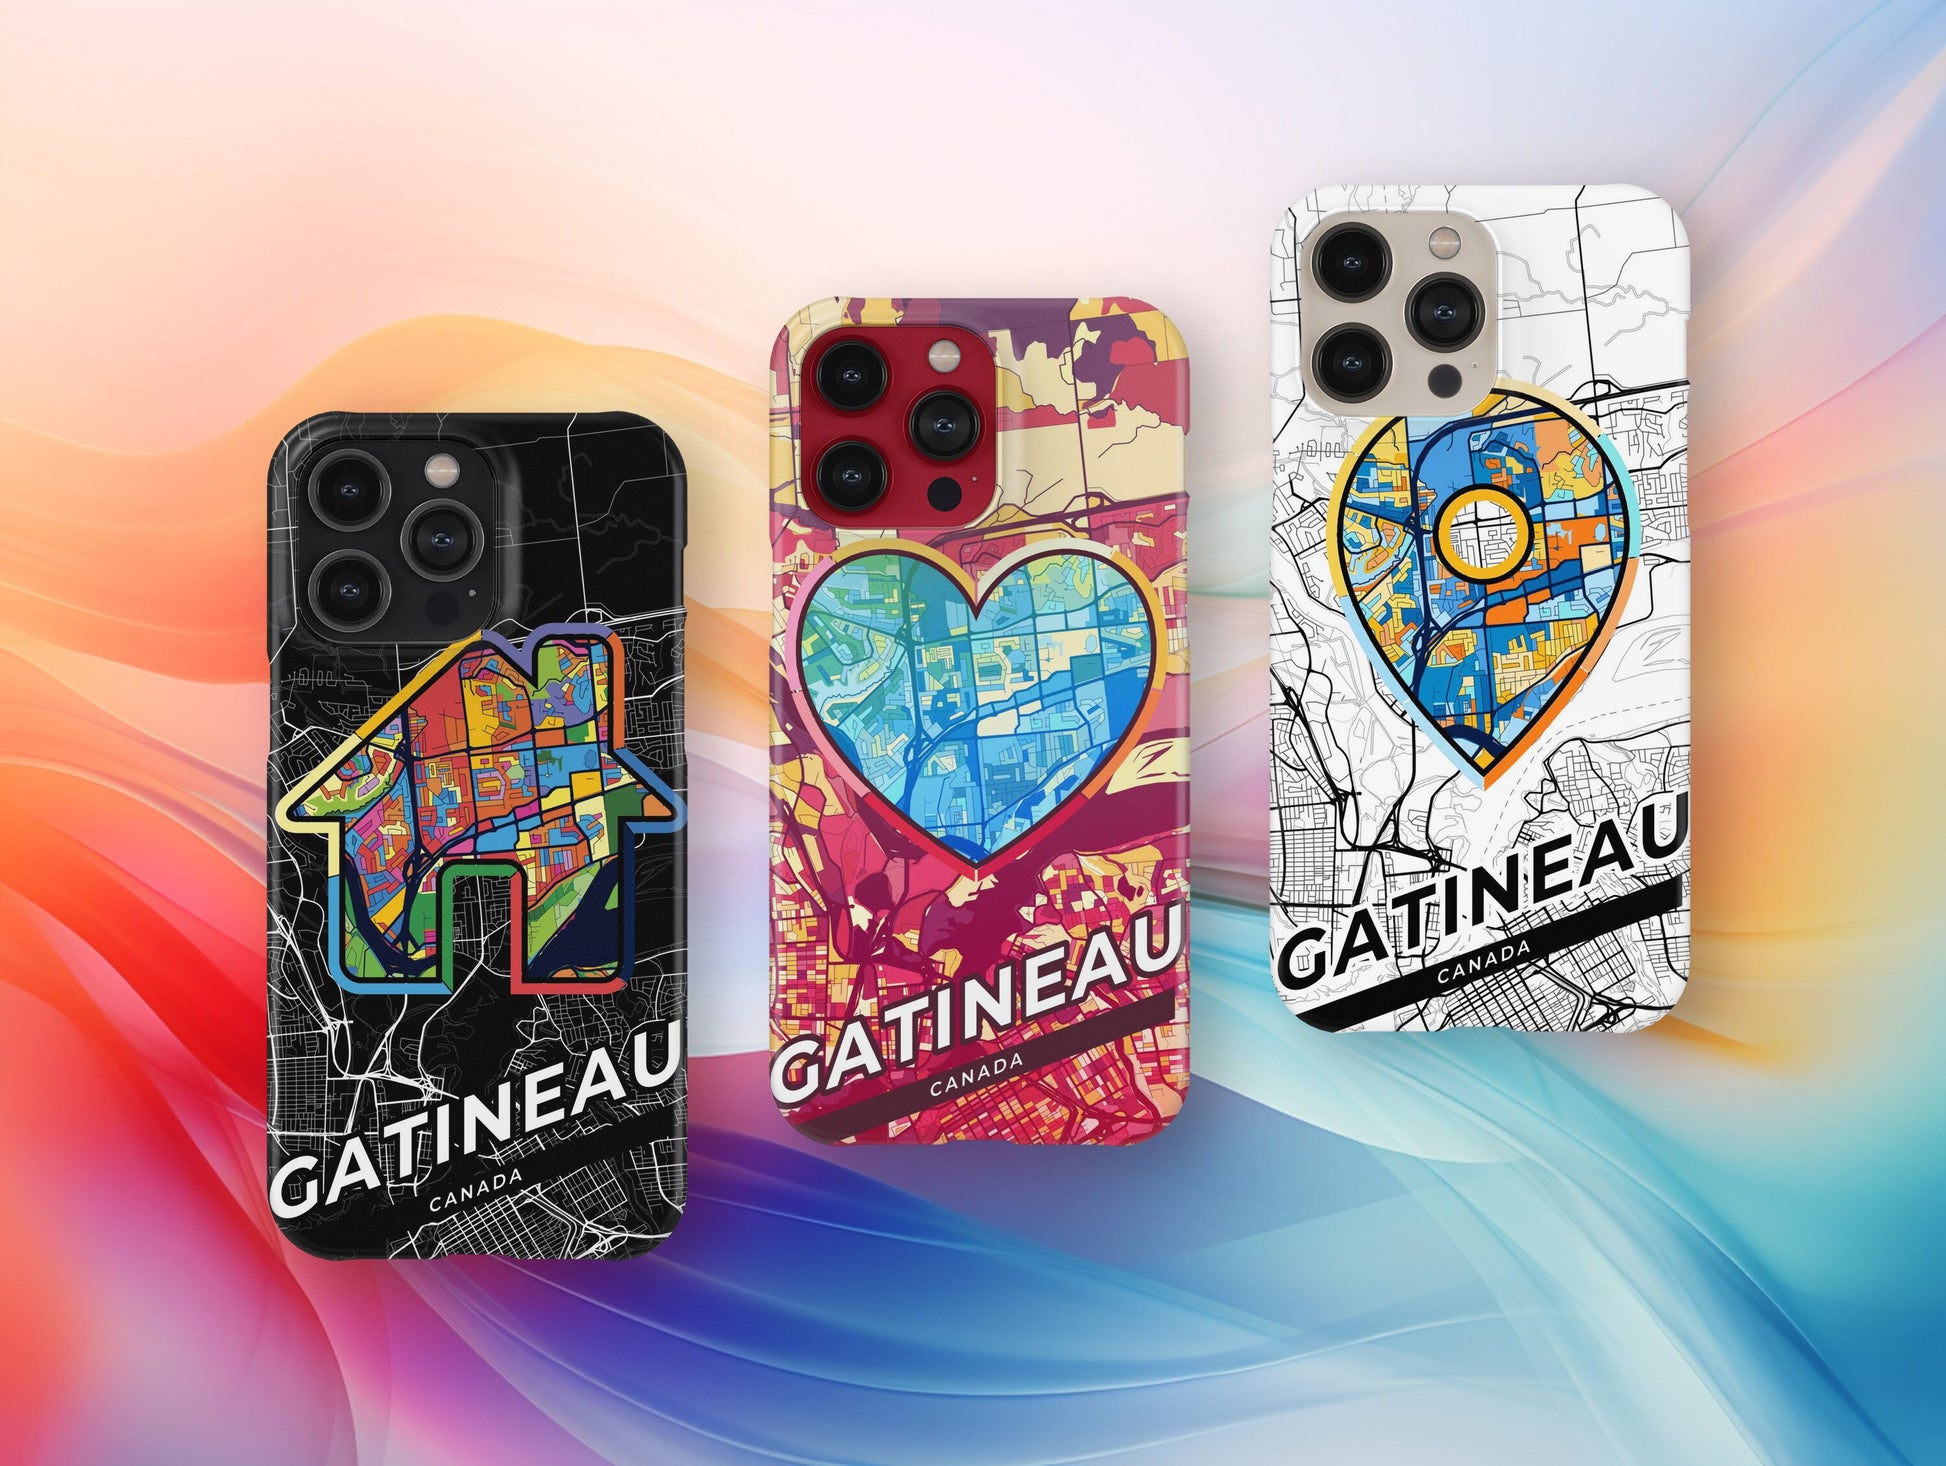 Gatineau Canada slim phone case with colorful icon. Birthday, wedding or housewarming gift. Couple match cases.